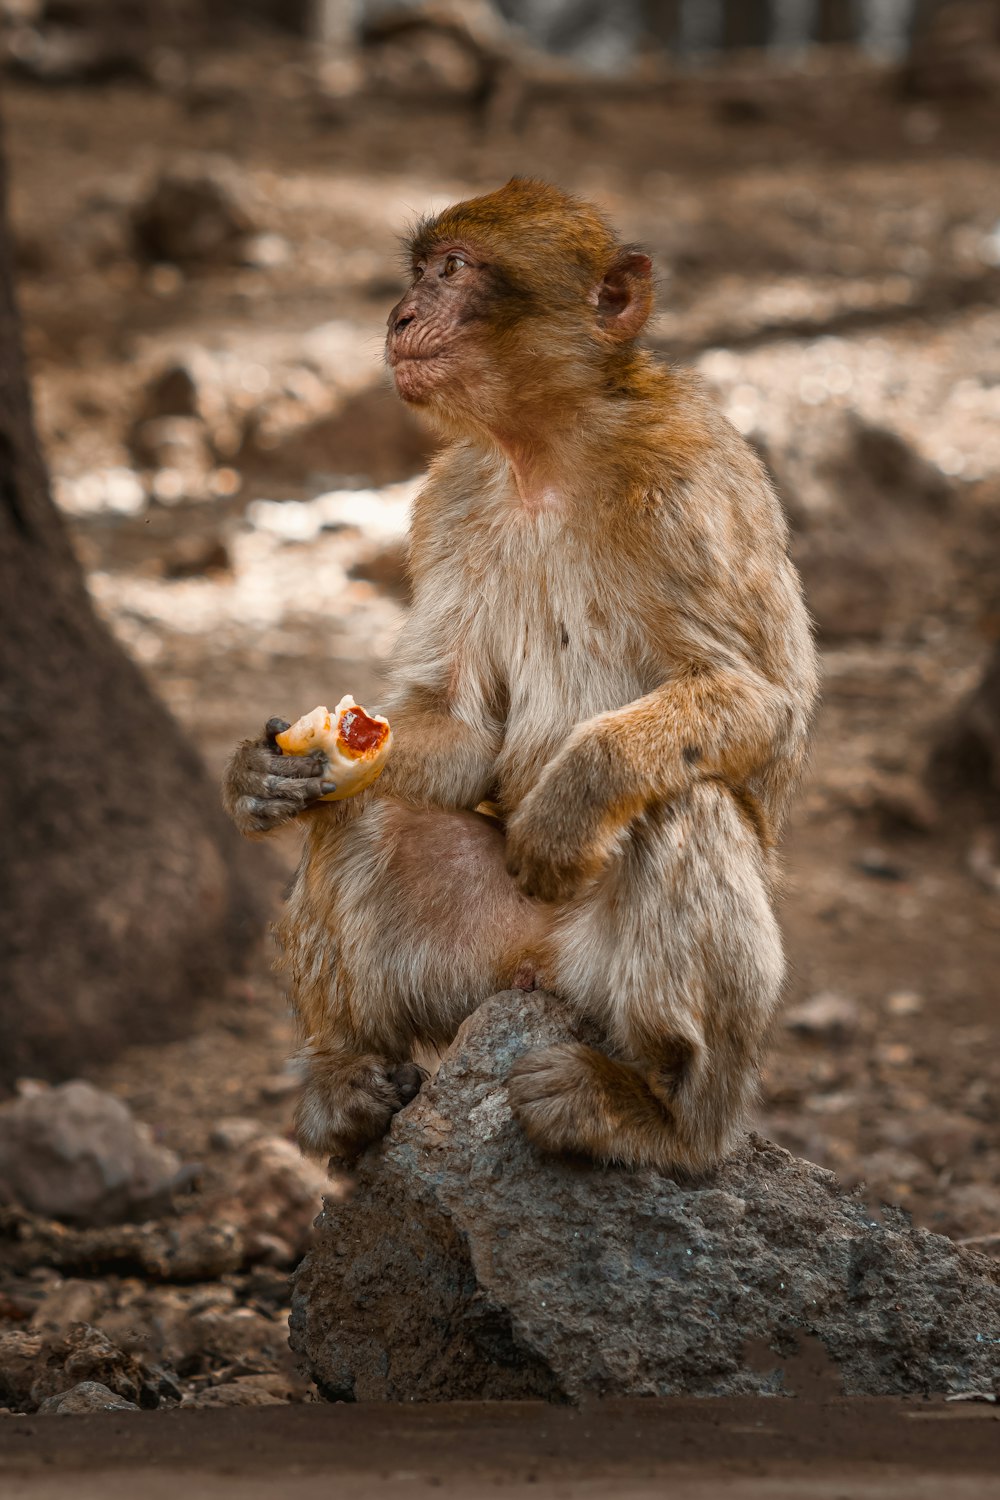 a monkey sitting on a rock eating a piece of pizza